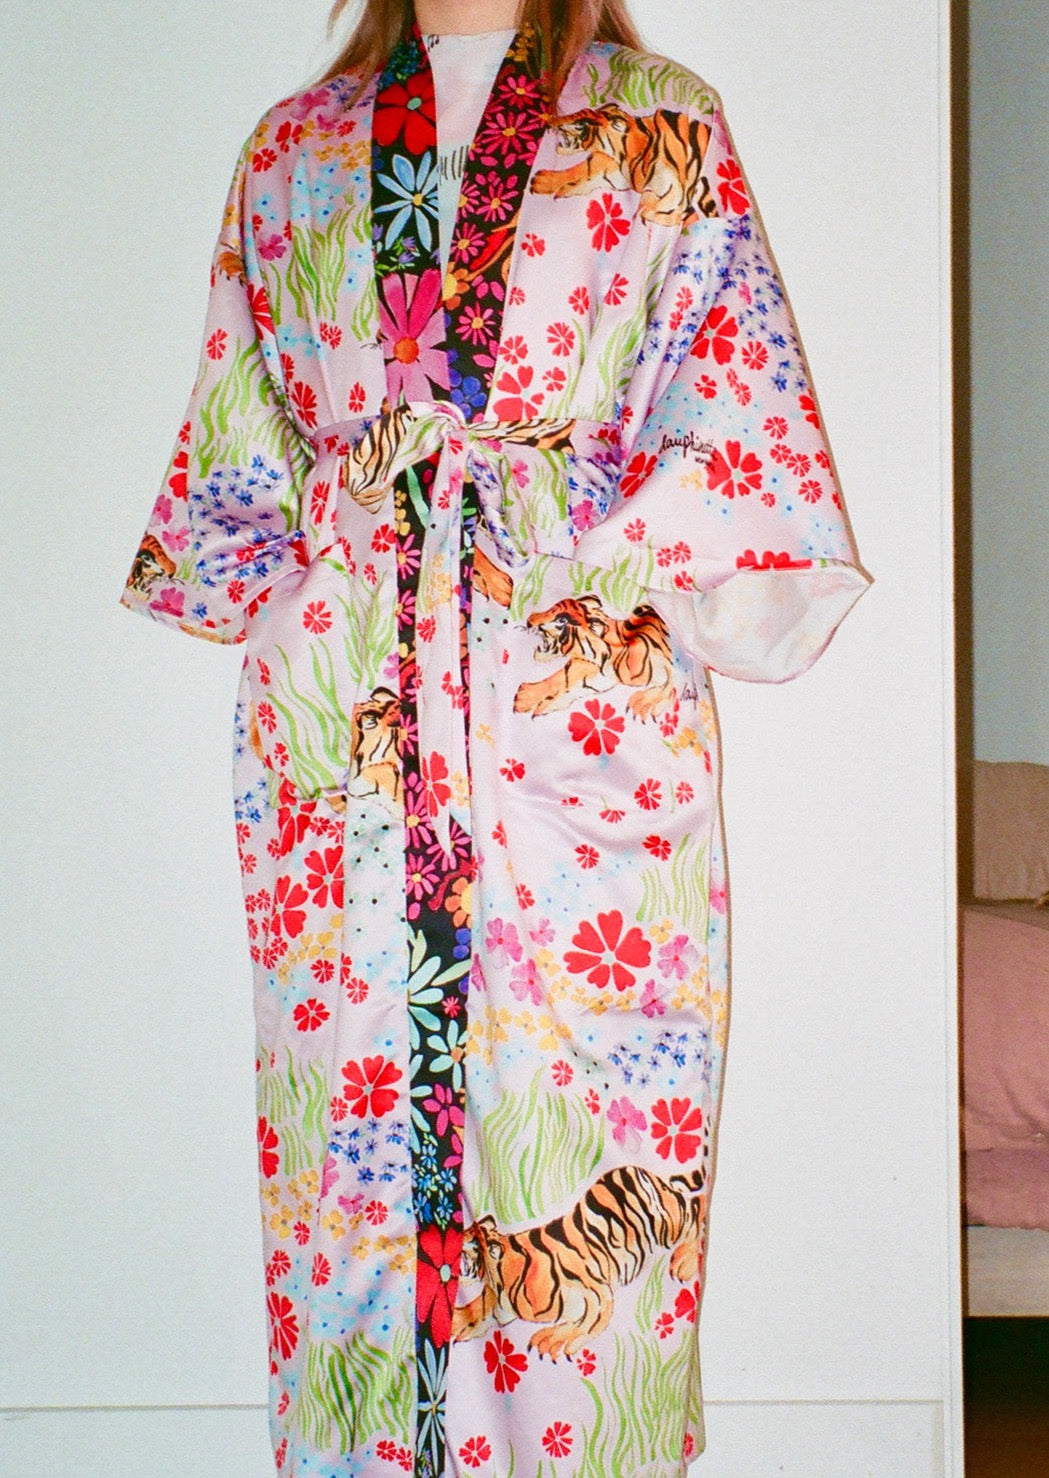 The robe that does it all, our R23 Oracle Robe features both Tiger Blooms and Wonderland Flora prints for a joyful, sartorial eruption of color.